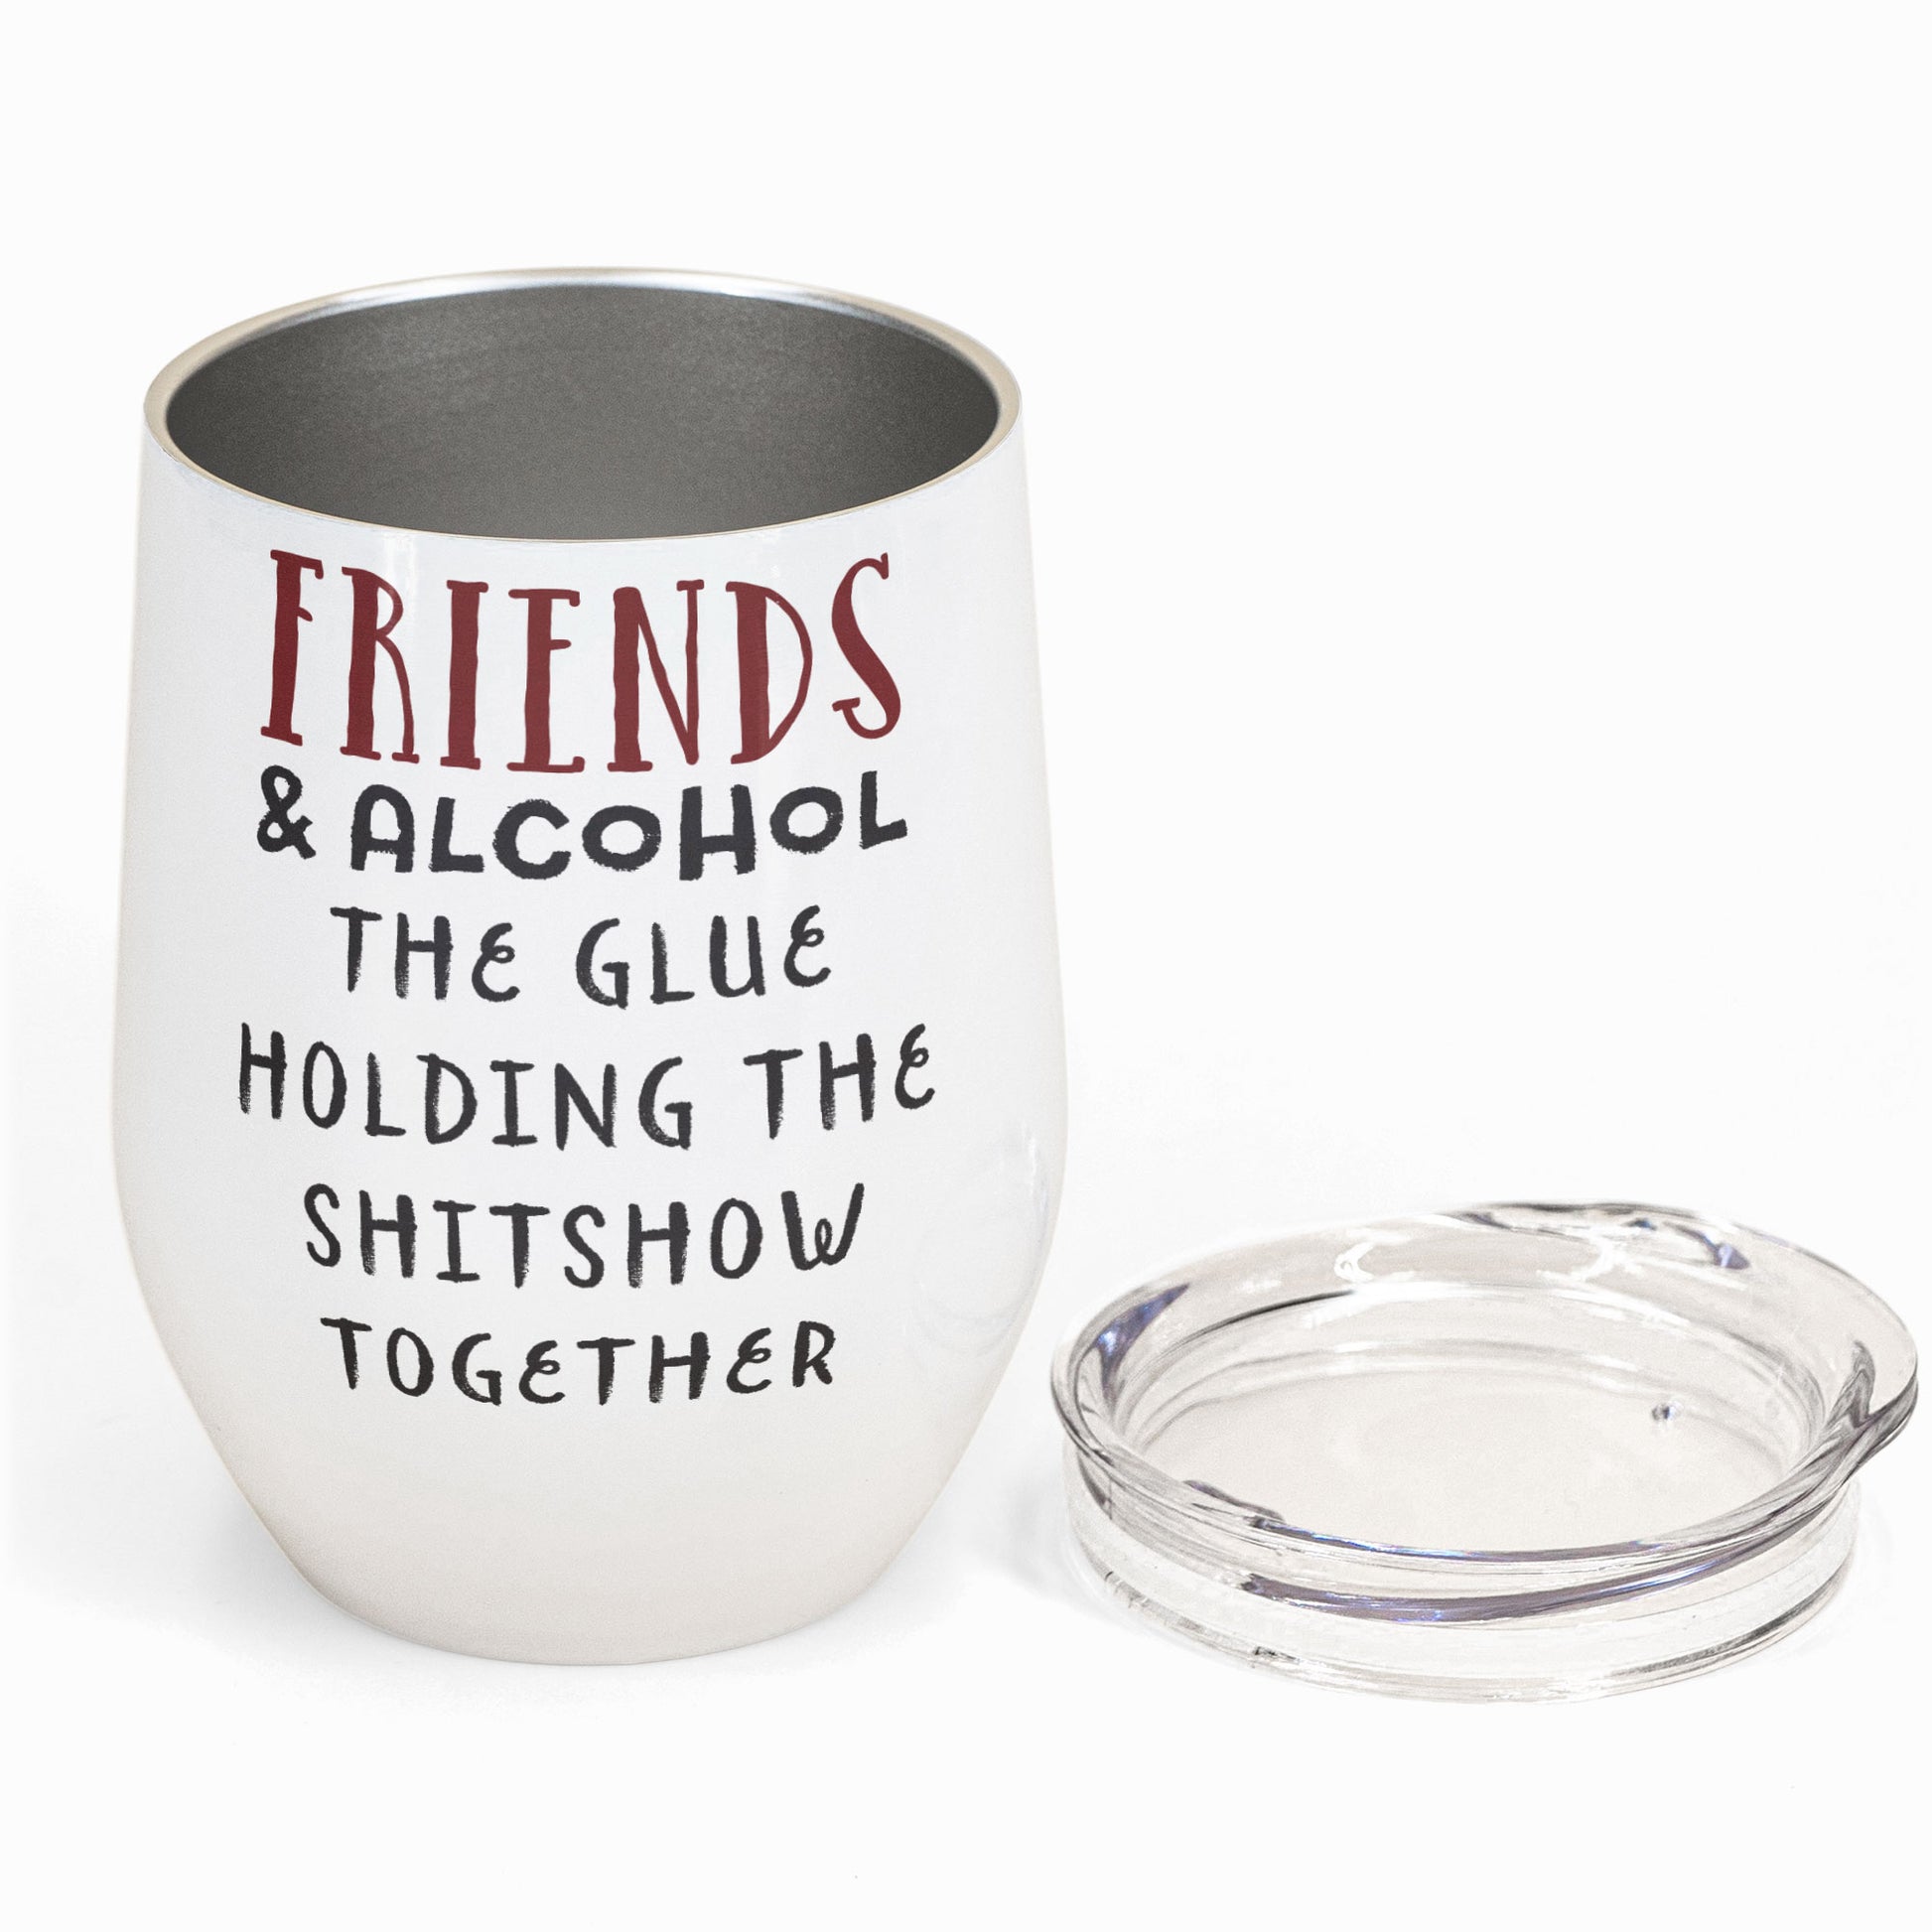 Friends And Alcohol The Glue Holding The Shitshow Together - Personalized Wine Tumbler - Birthday Gift For Bestie, Sister, BFF, Best Friend, Friendc